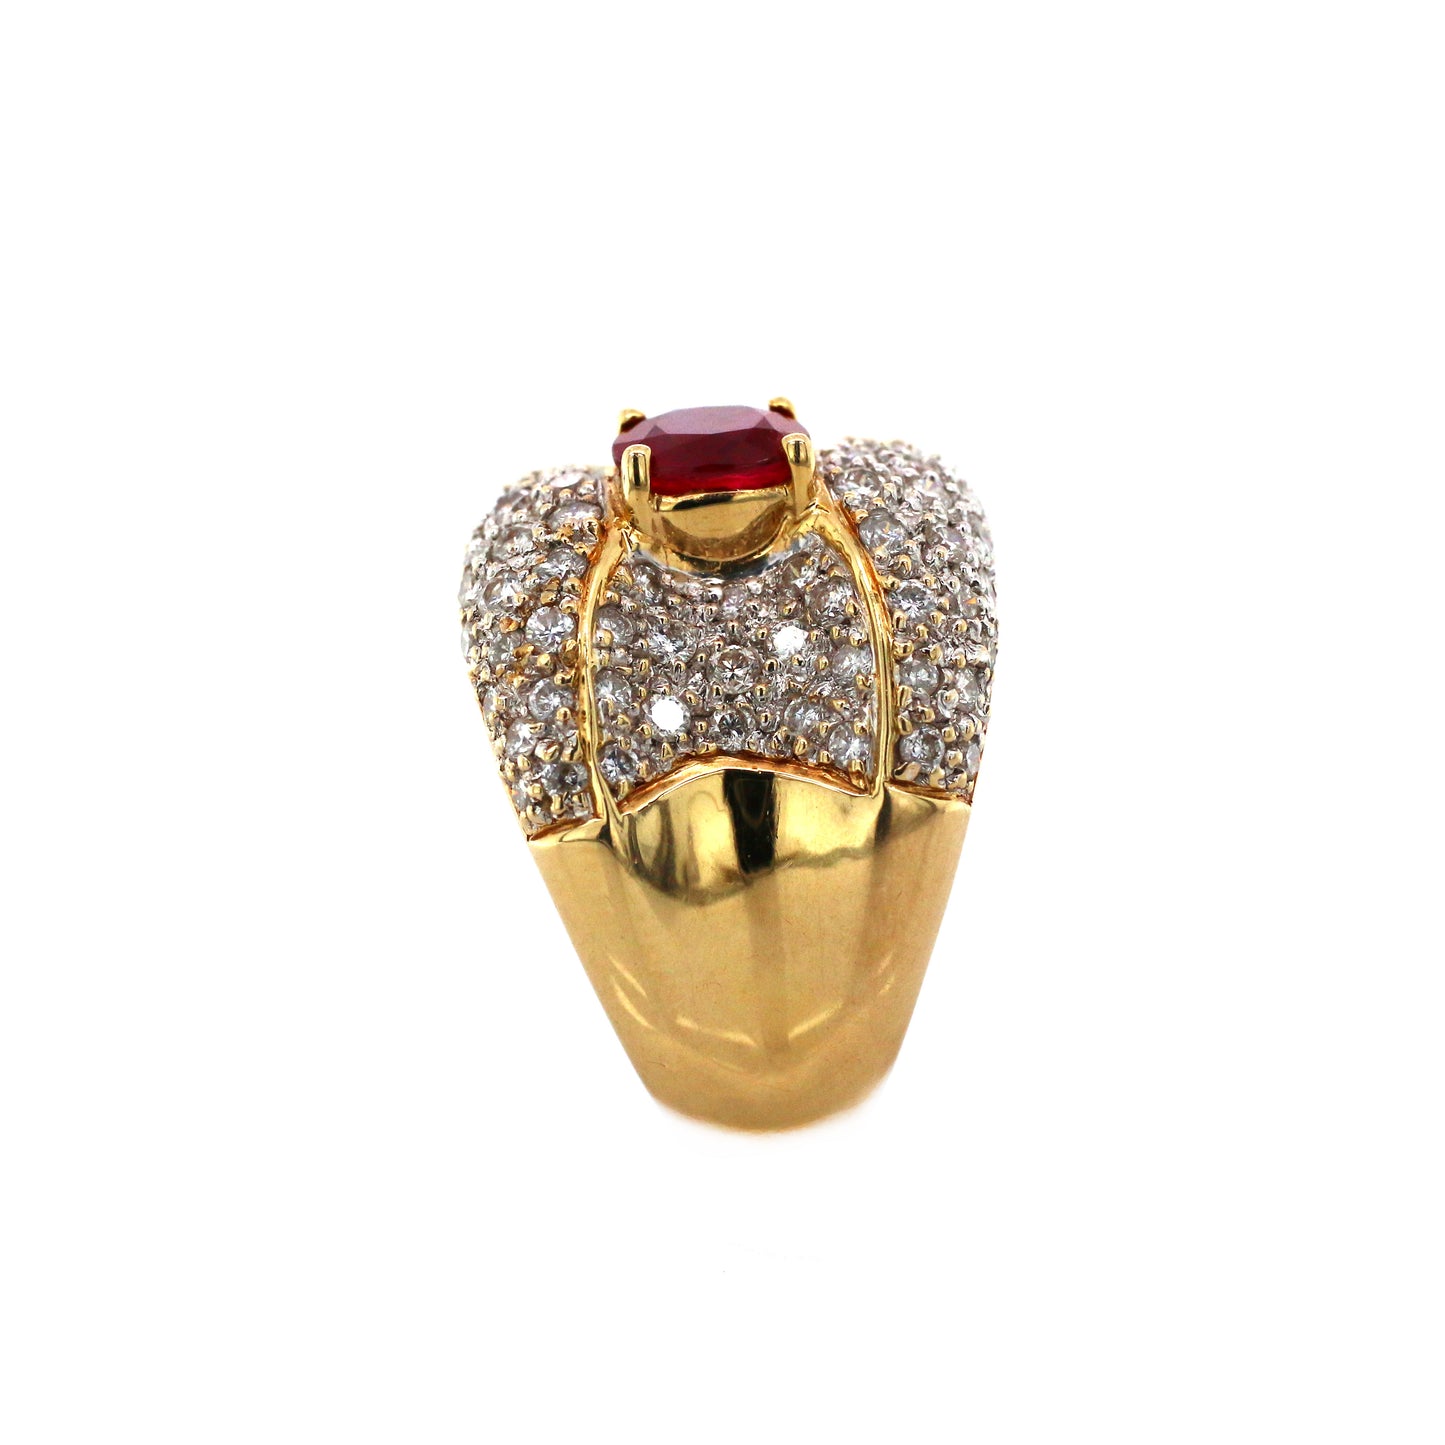 Beautiful and Almost Hot - Luxury Blood Ruby Wedding Ring For Groom and Bride